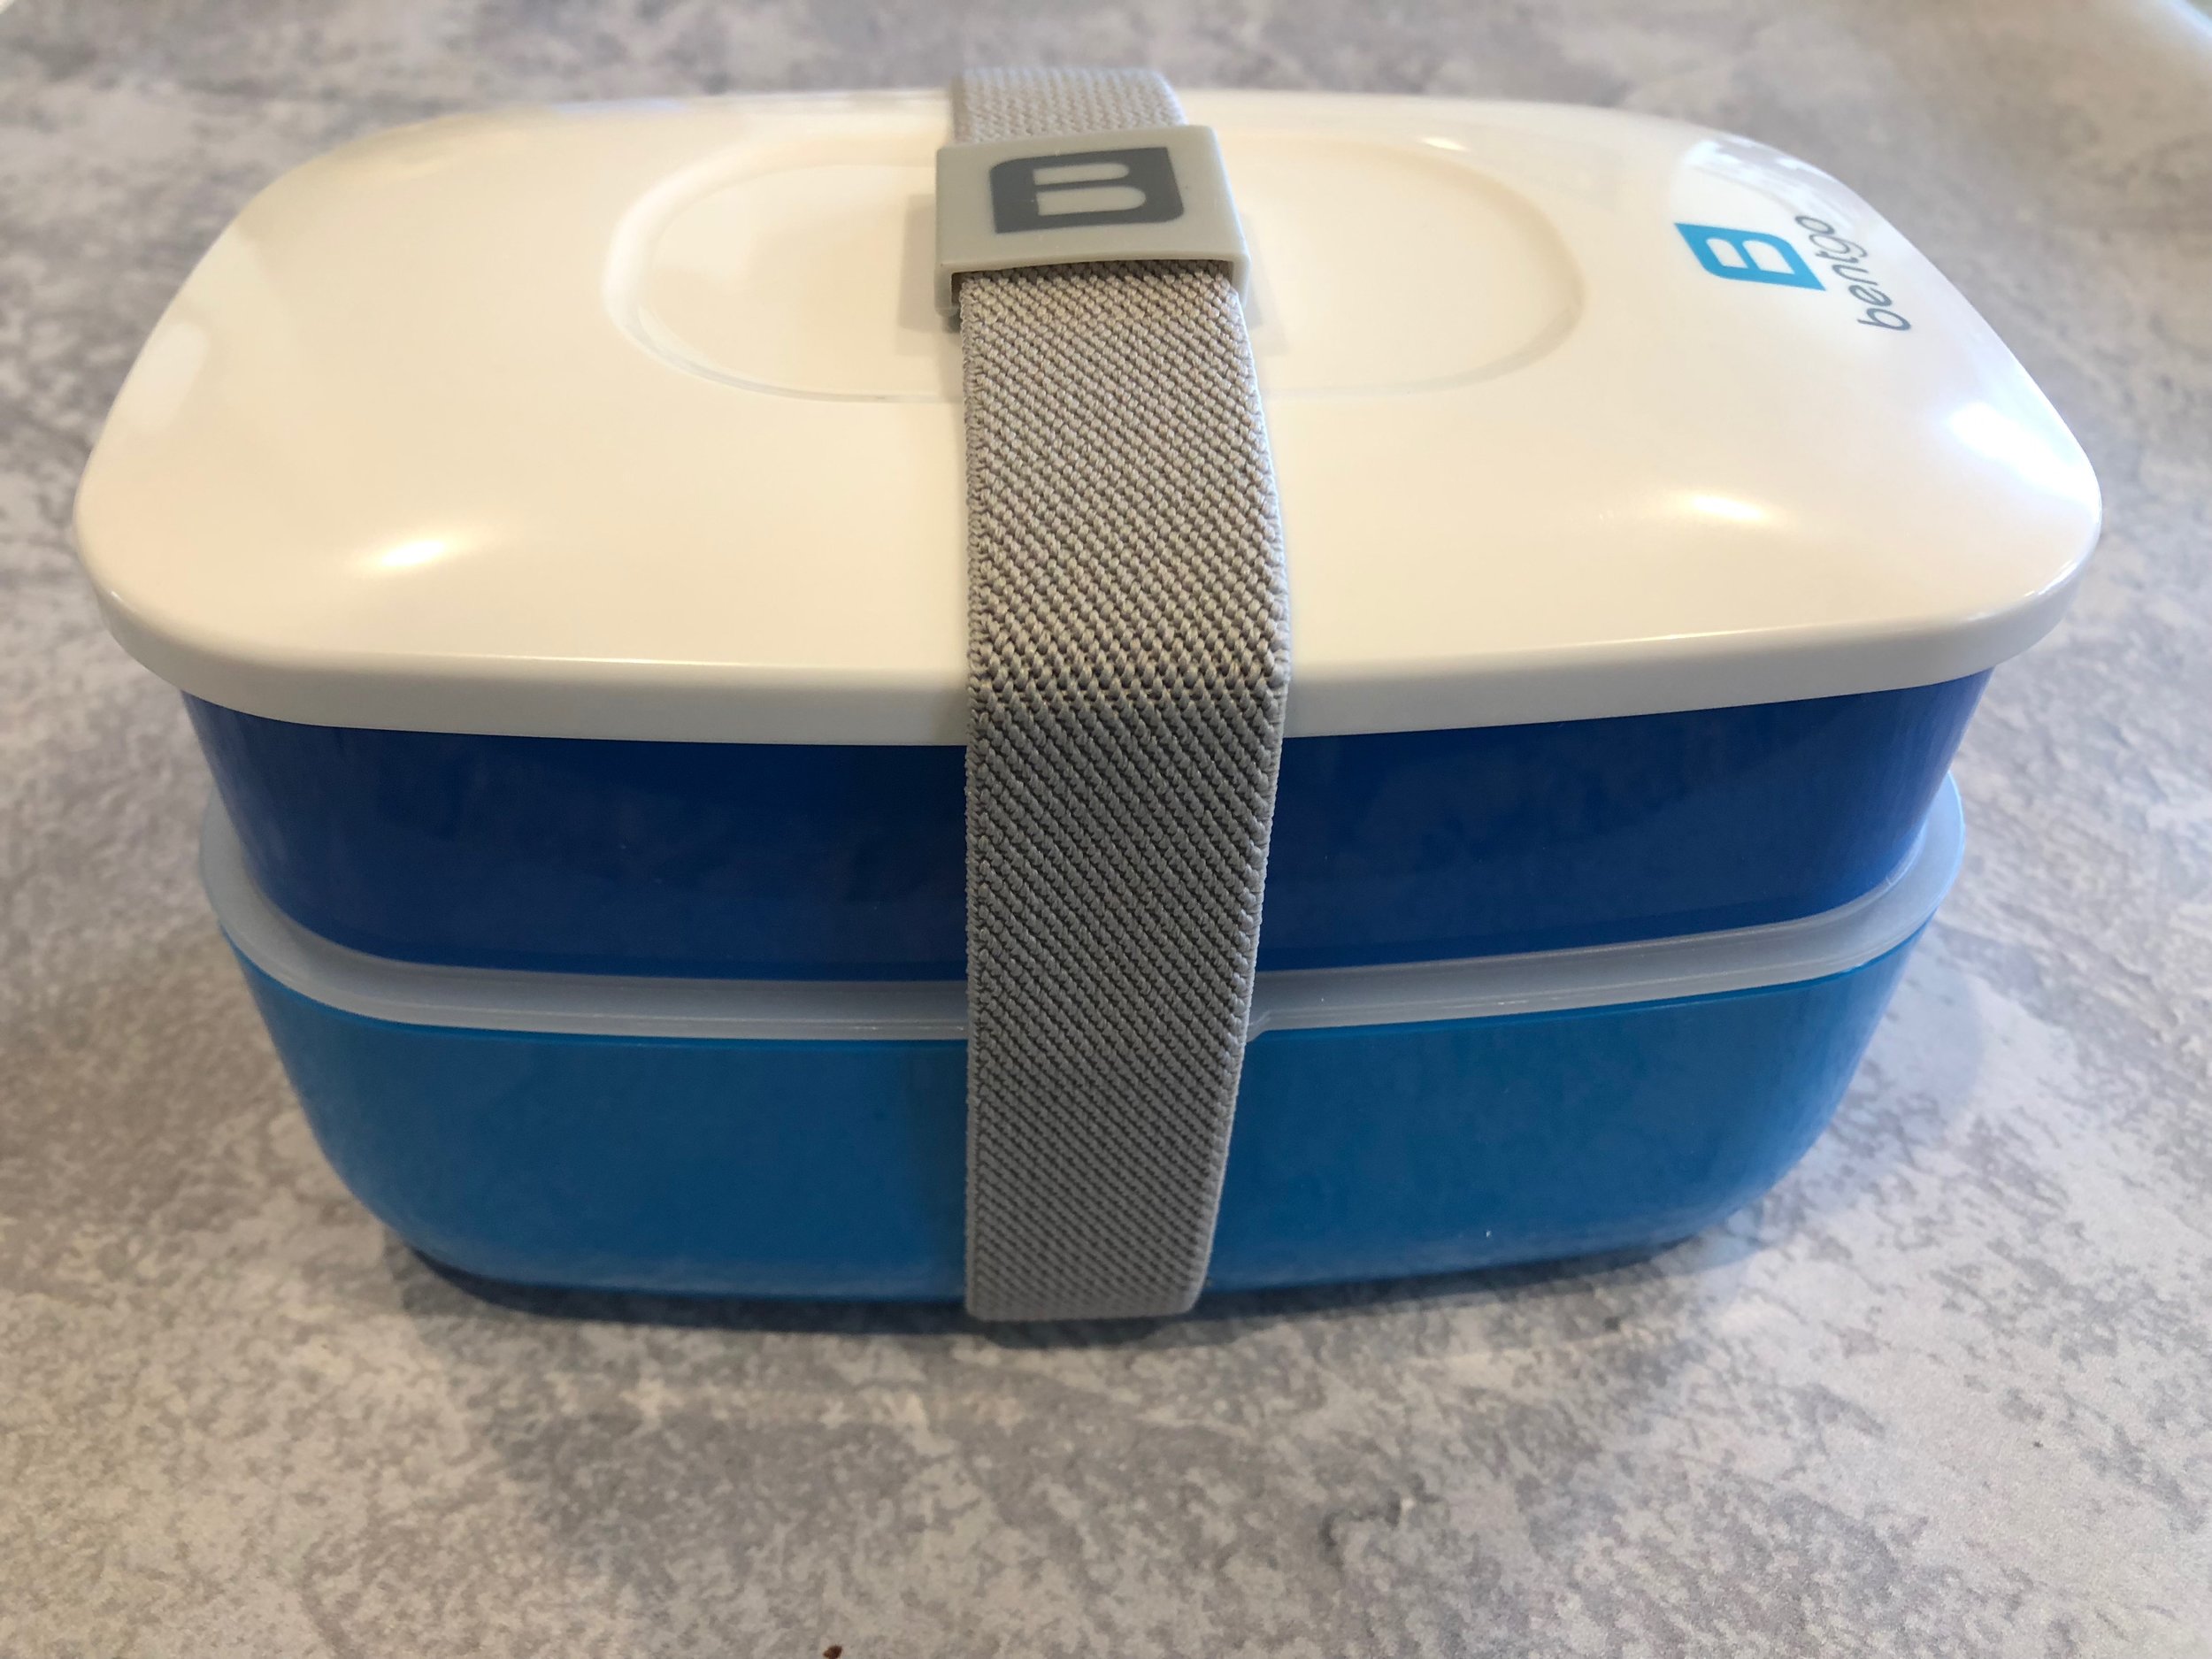 Bentgo Box back to school lunch container for Keto and Low Carb Lunches